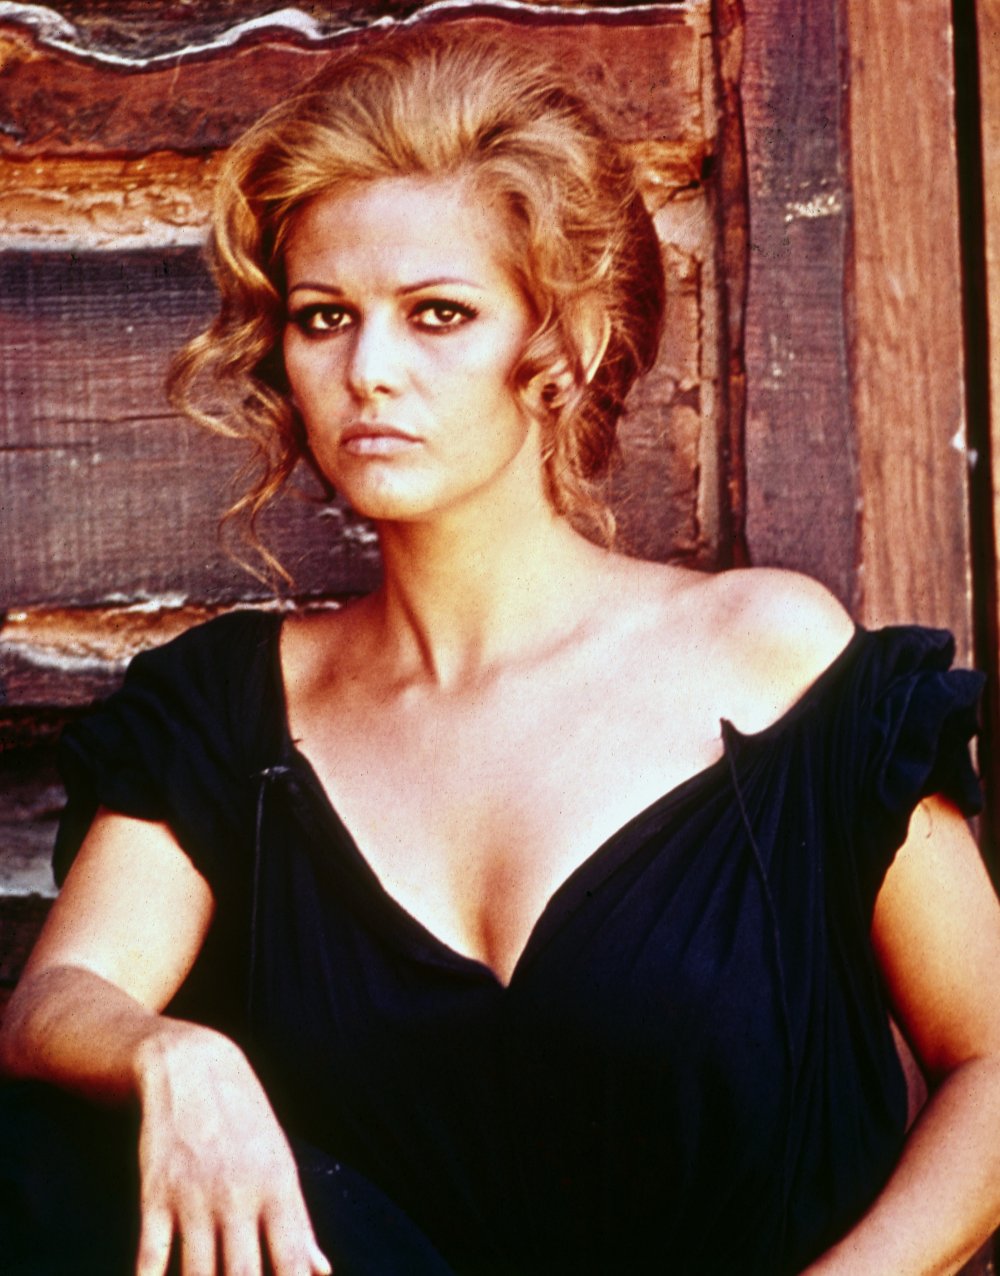 once-upon-a-time-in-the-west-1968-007-claudia-cardinale-medium-shot-bfi-00o-23h.jpg?itok=YZcDeJa3